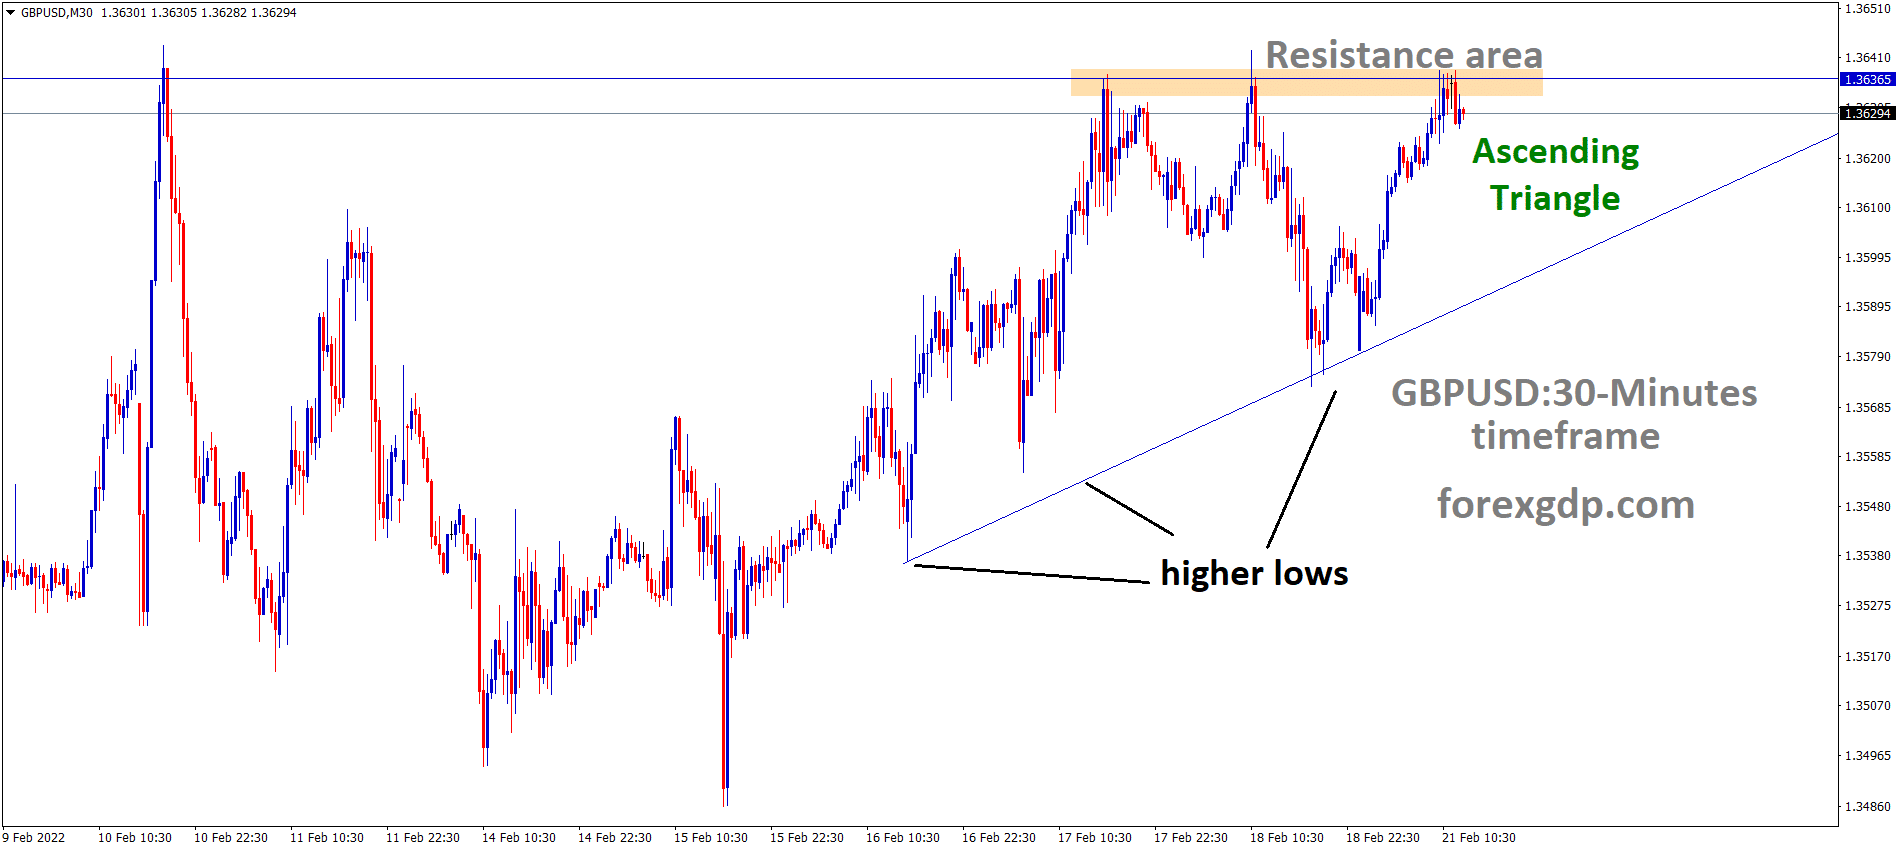 GBPUSD is moving in an ascending triangle pattern and the market has fallen from the resistance area of the pattern.